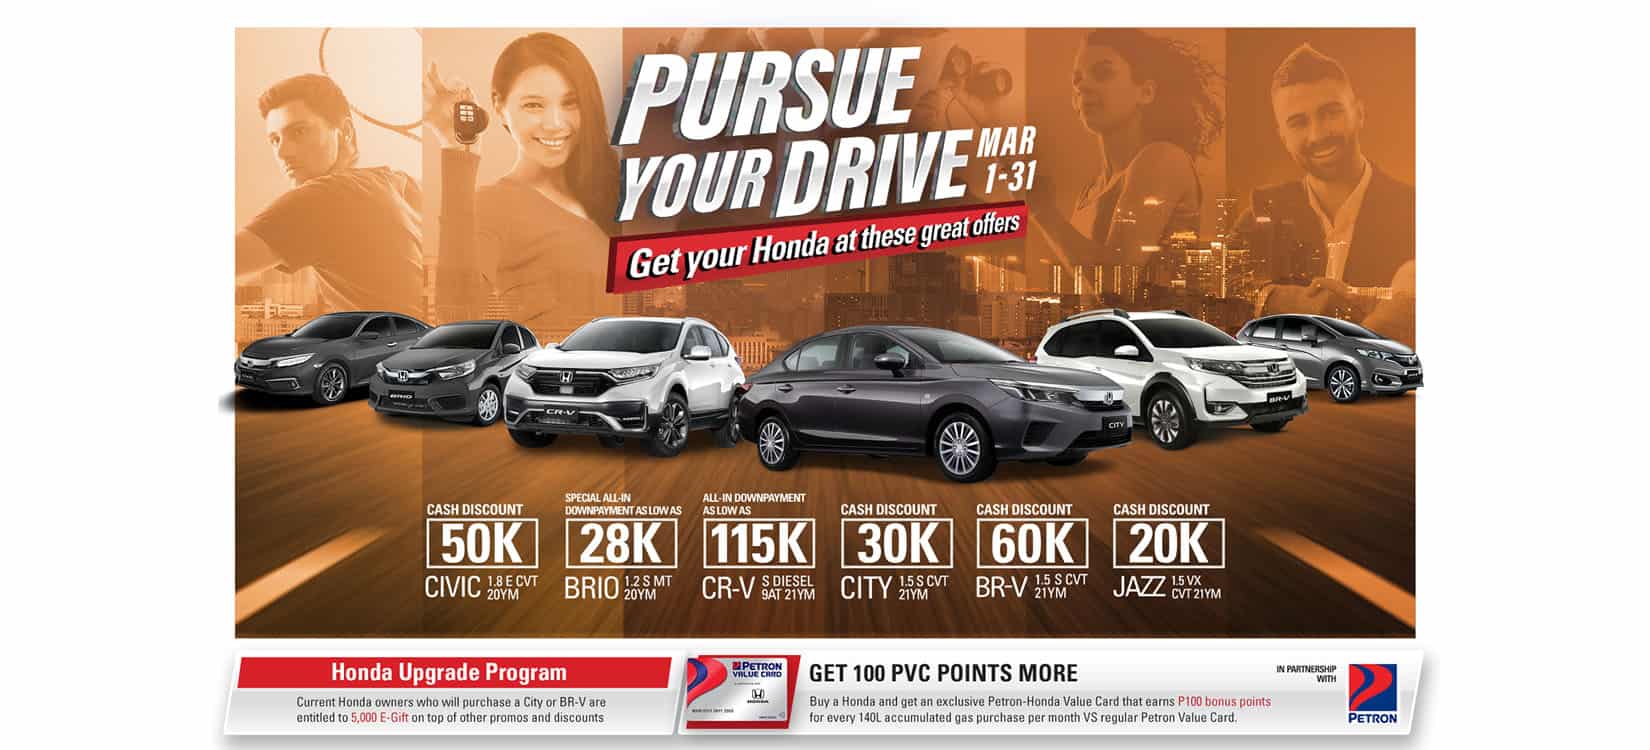 Honda extends discounts, promos, and other offers this March